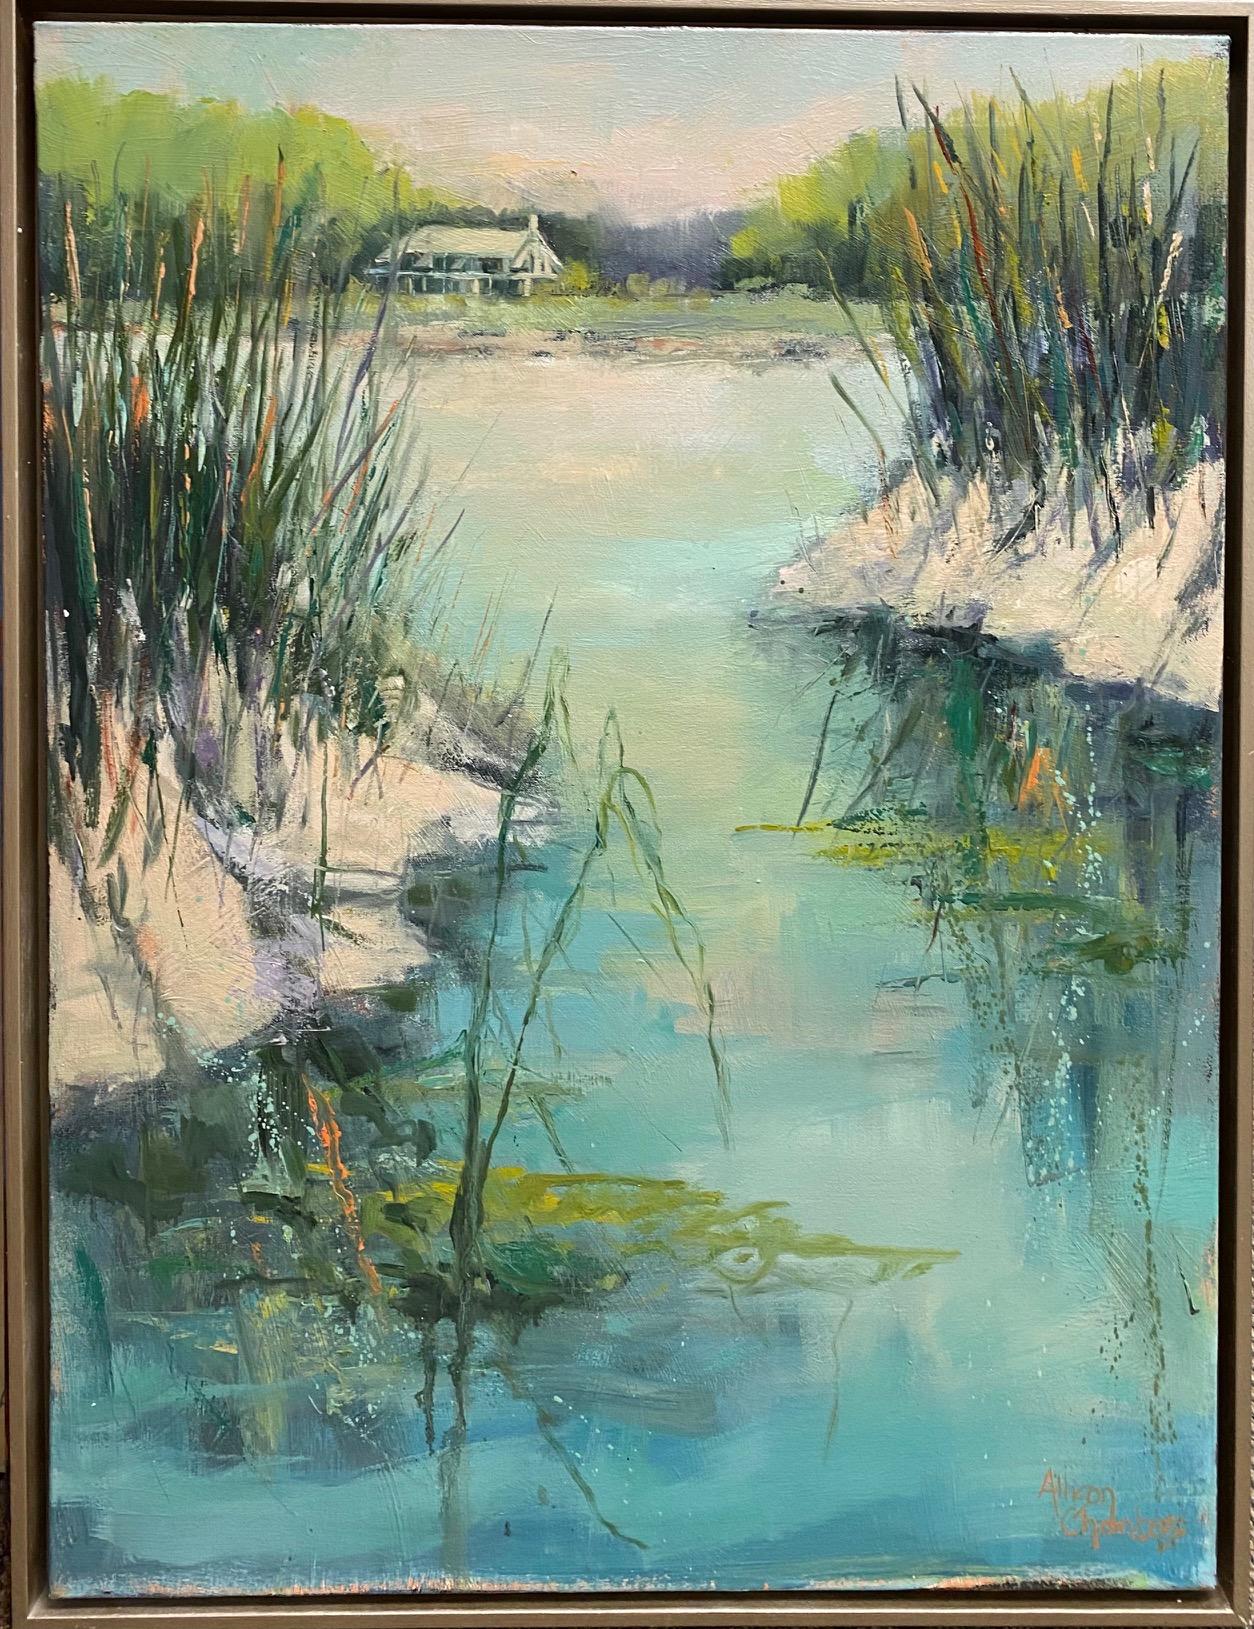 Through the Weeds II original 40x30 abstract expressionist marine landscape